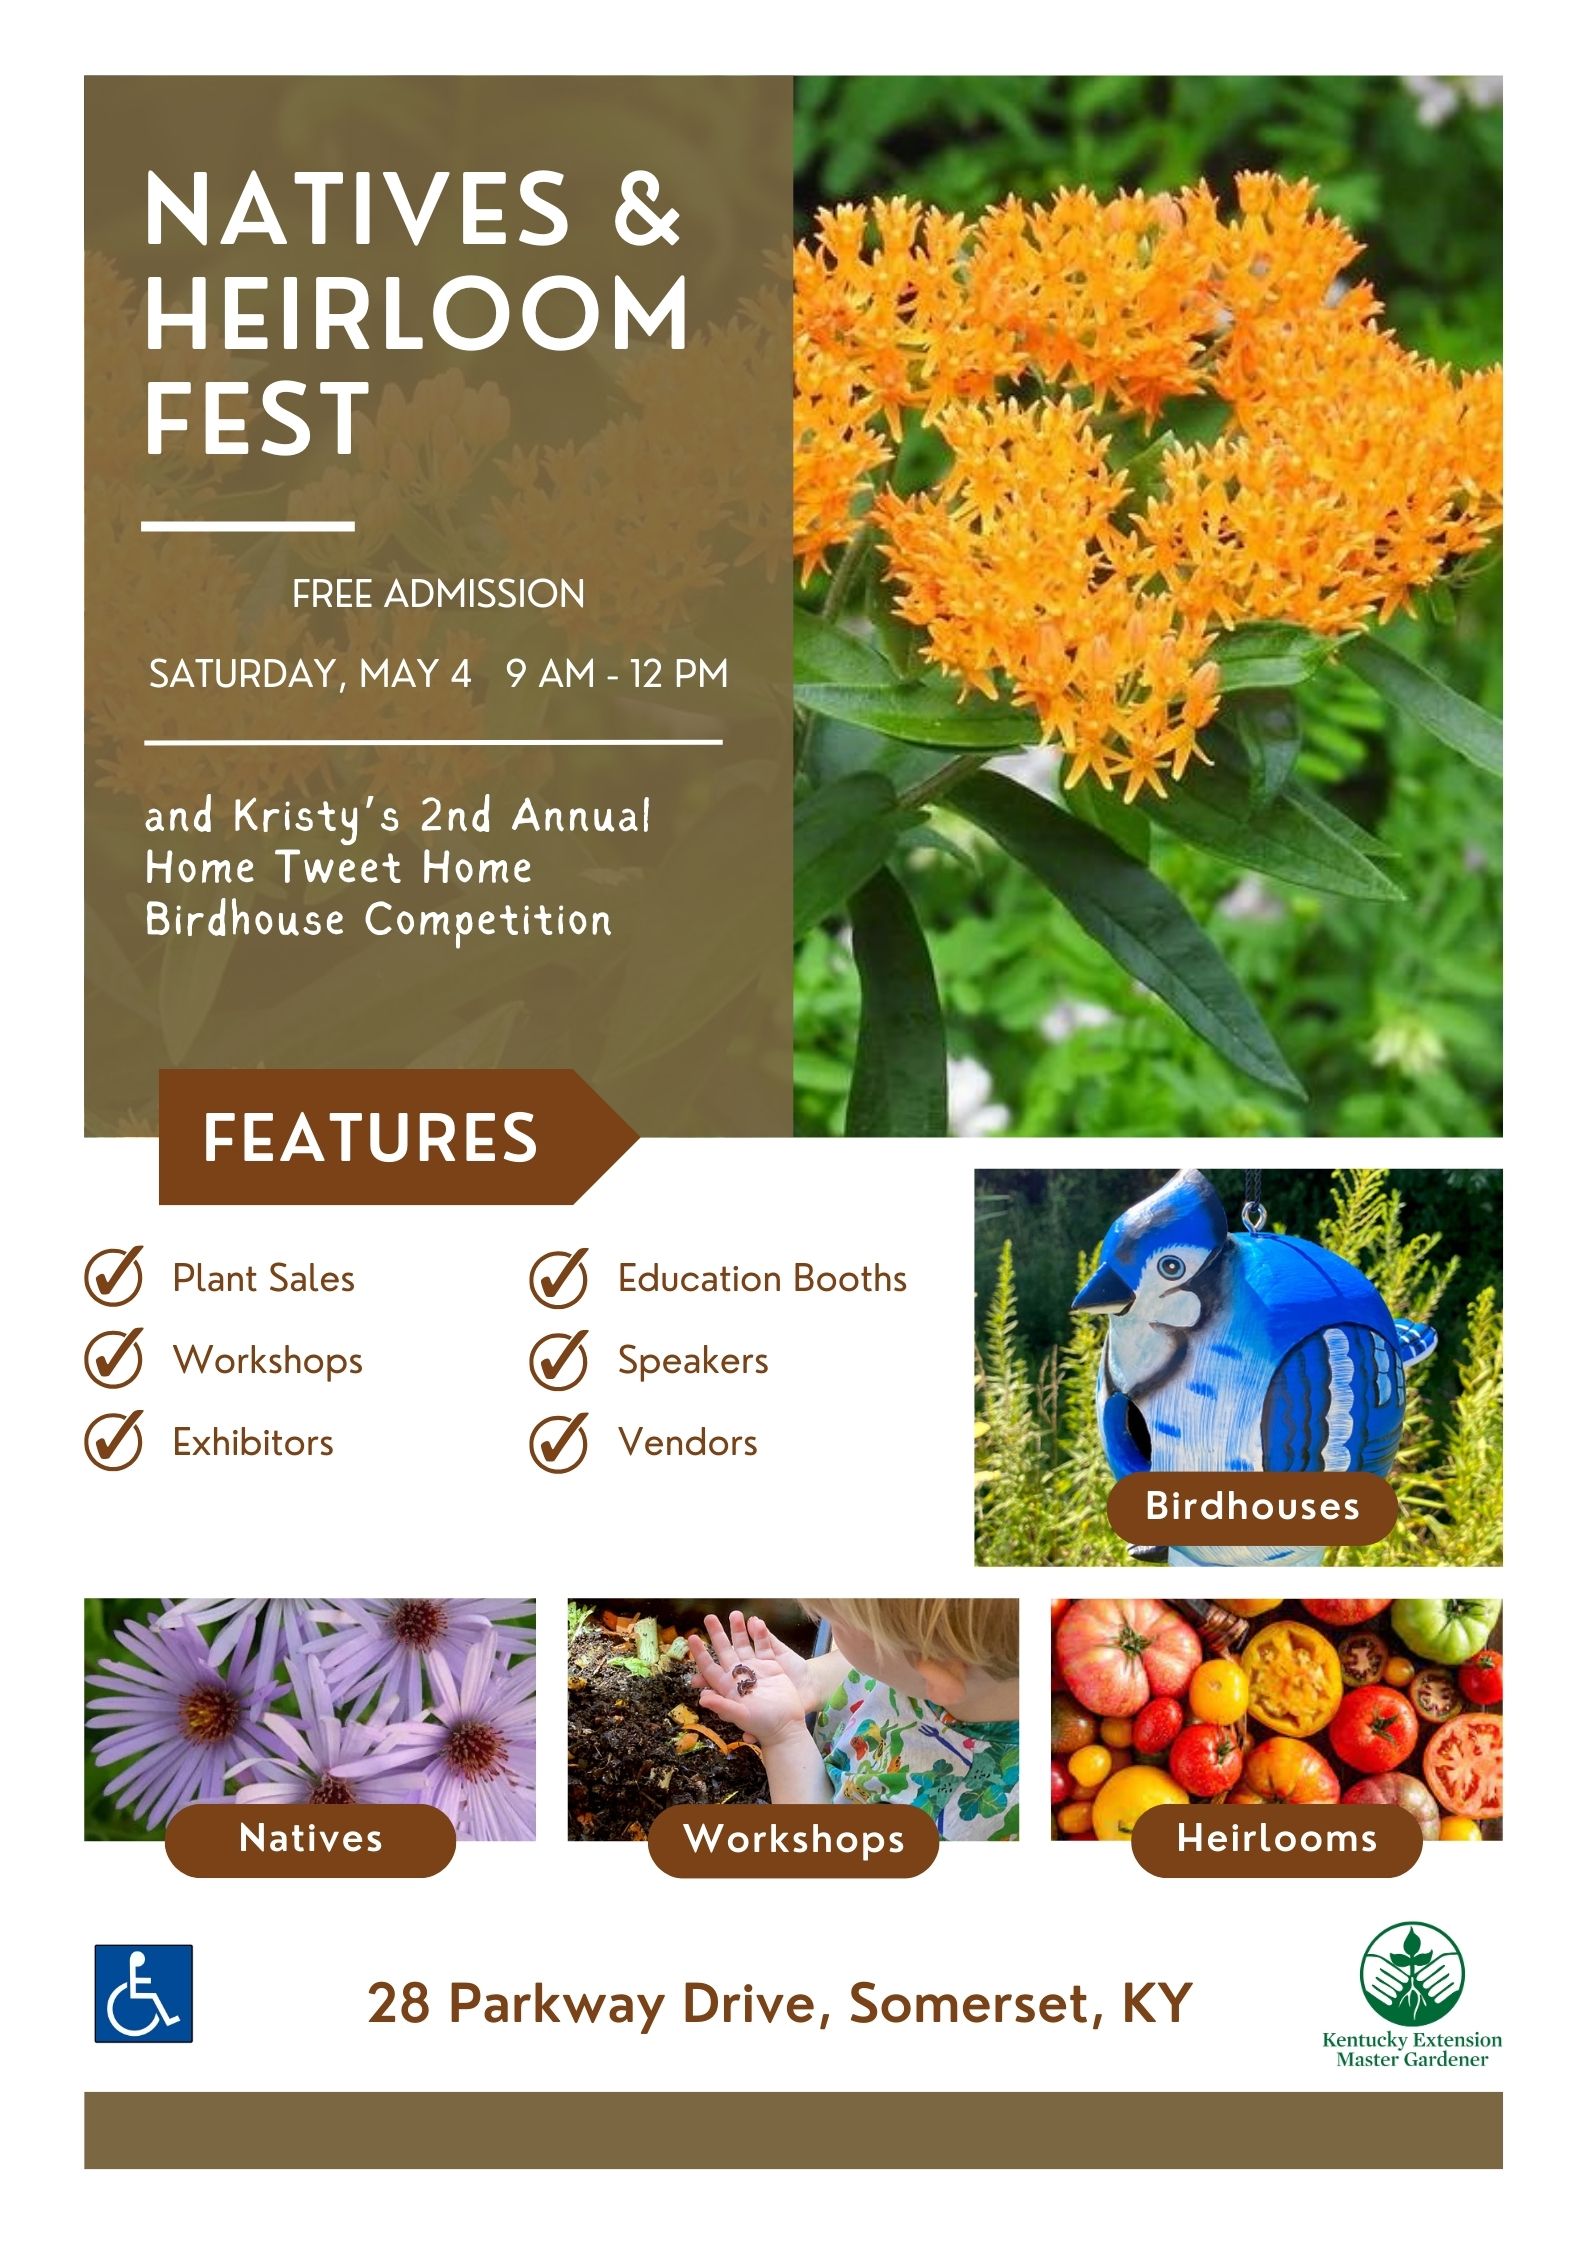 native & heirloom fest event